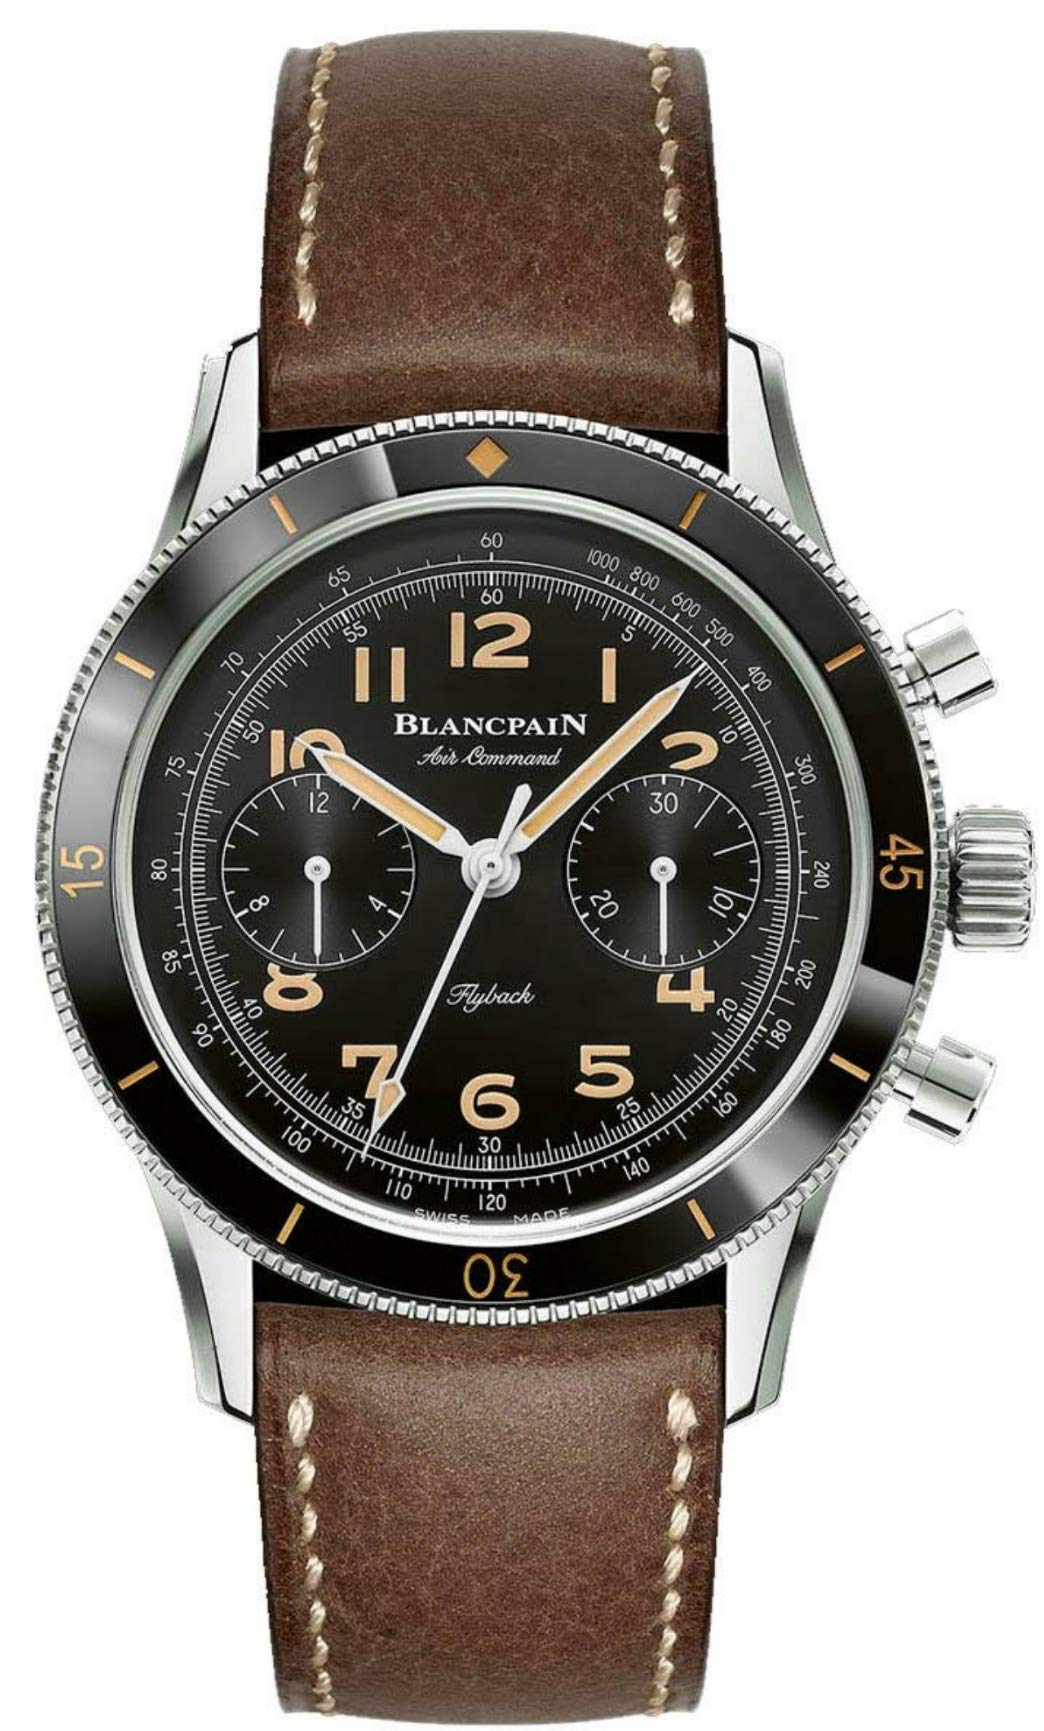 Blancpain Air Command Re-Issue Limited Edition Flyback Chronograph Watch AC01 1130 63A